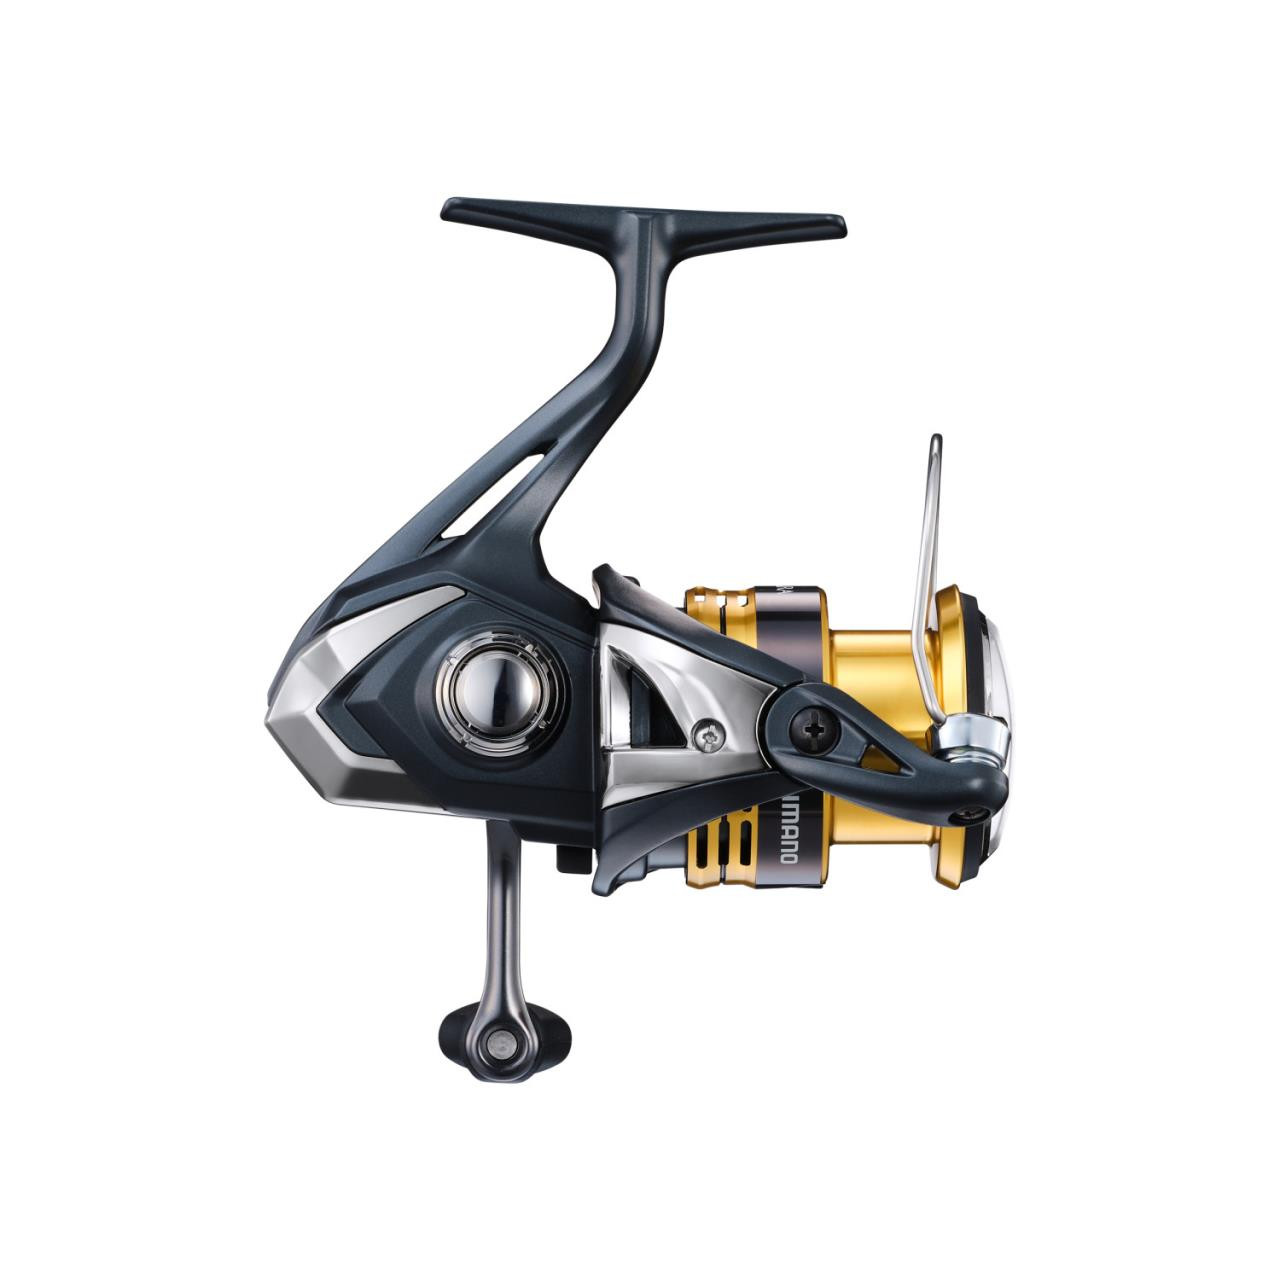 https://cdn11.bigcommerce.com/s-70mih4s/images/stencil/1280x1280/products/22030/58246/Shimano-Sahara-FJ-Spinning-Reels-022255261043_image3__78478.1651597639.jpg?c=2